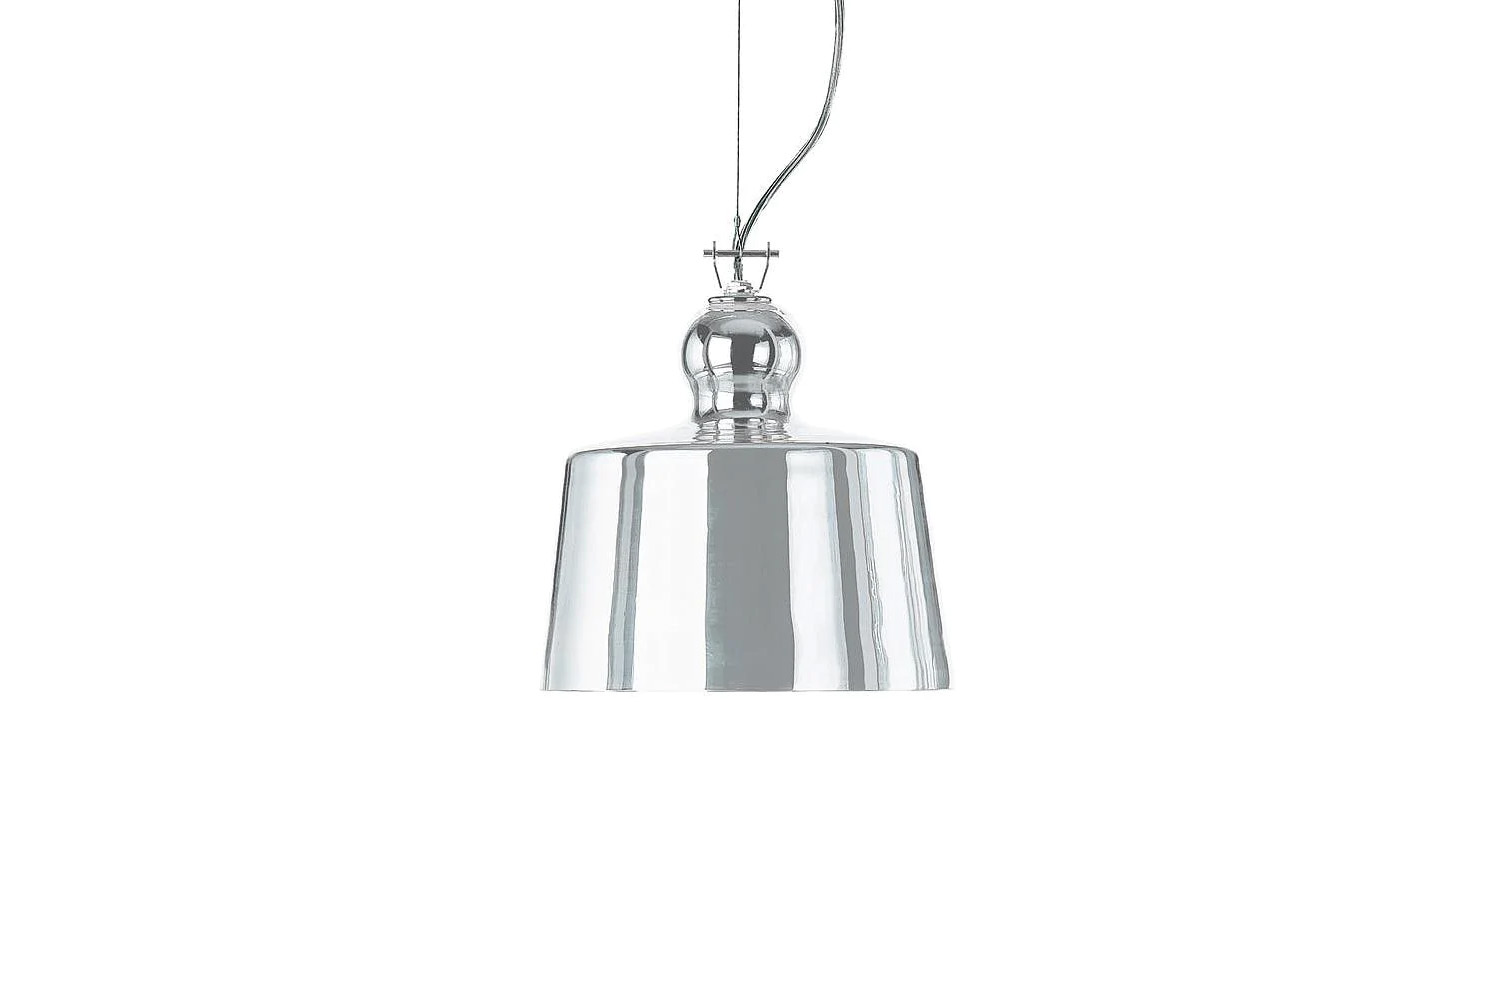 designed by michele delucchi, the acquatinta suspended lamp in silver coated mu 14